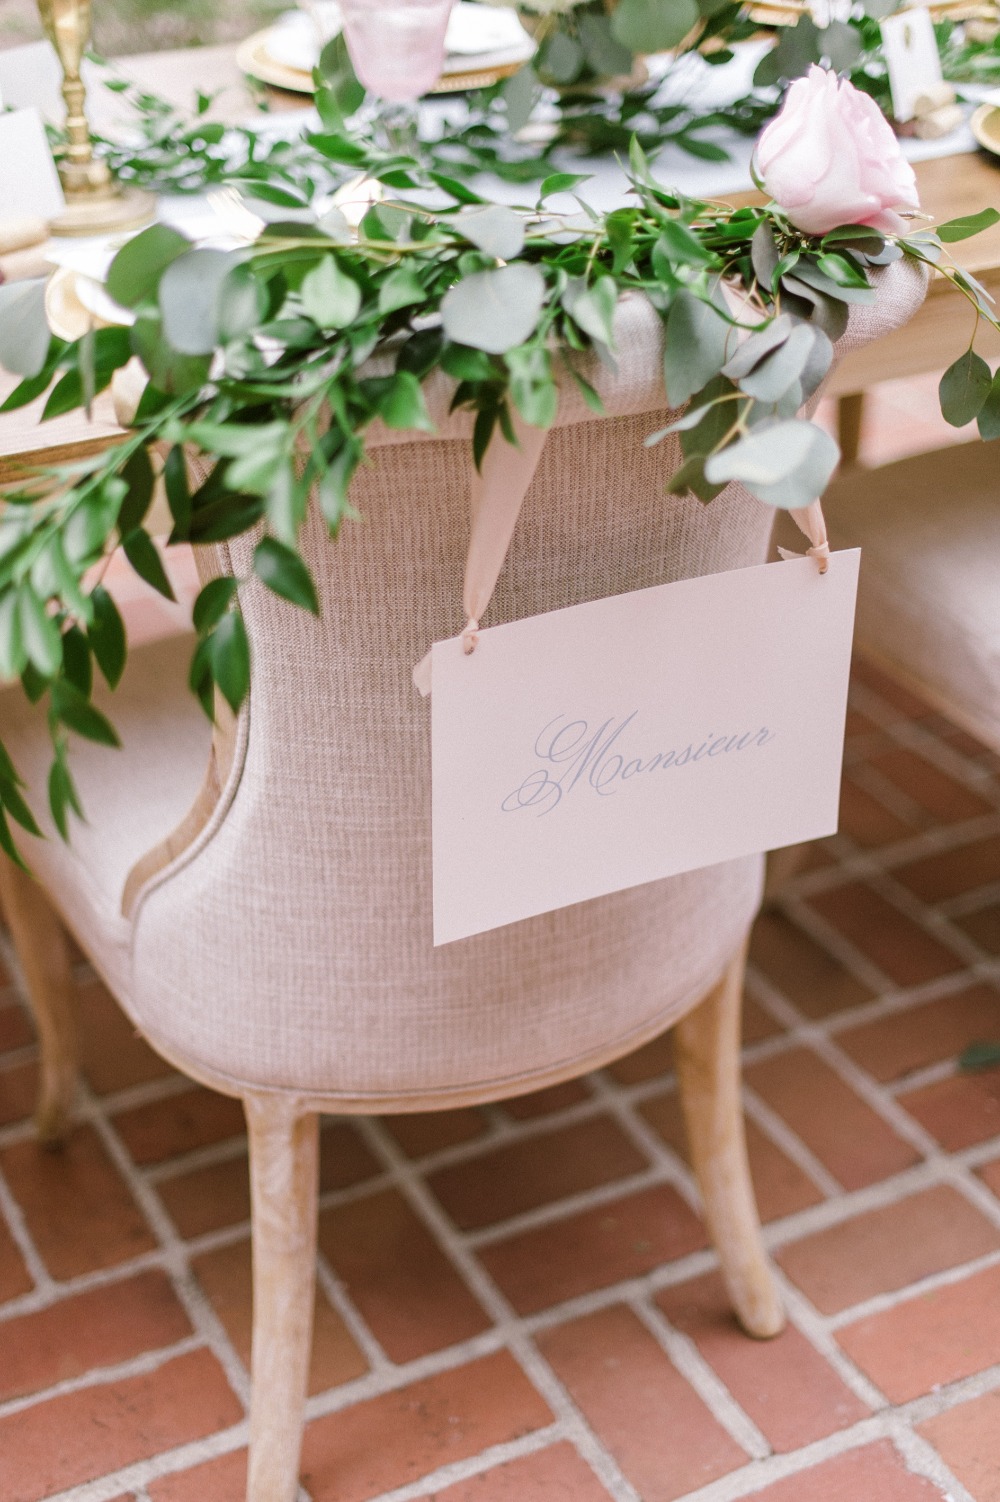 Mounsieur groom seat sign draped in a flower garland